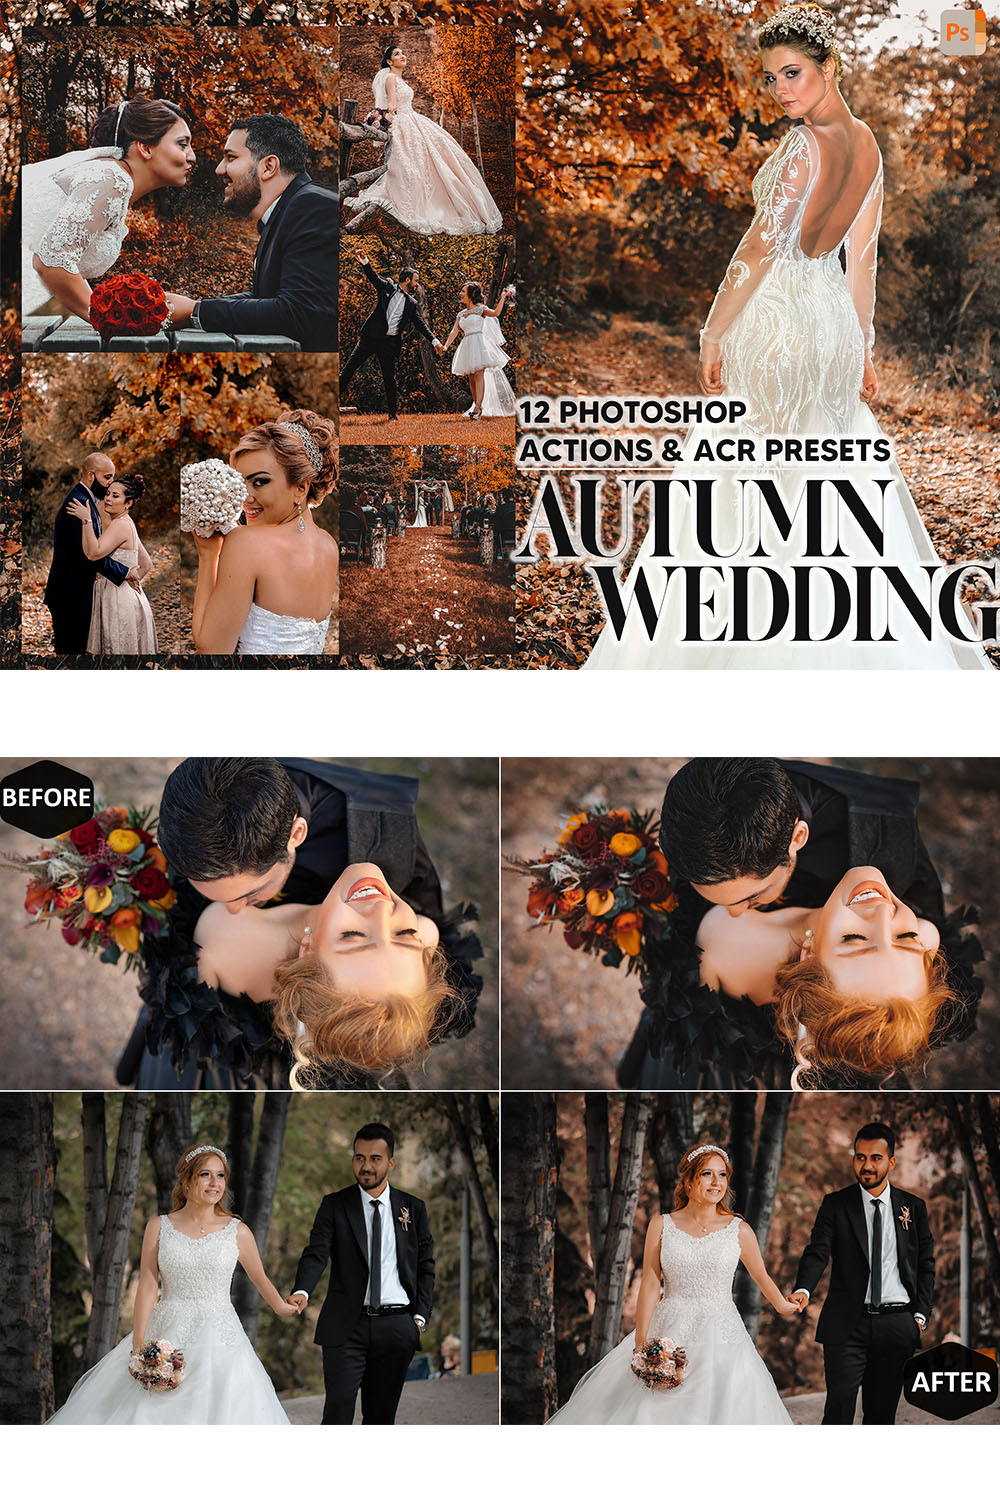 12 Photoshop Actions, Autumn Wedding Ps Action, Fall ACR Preset, Bridal Ps Filter, Atn Portrait And Lifestyle Theme For Instagram Blogger pinterest preview image.